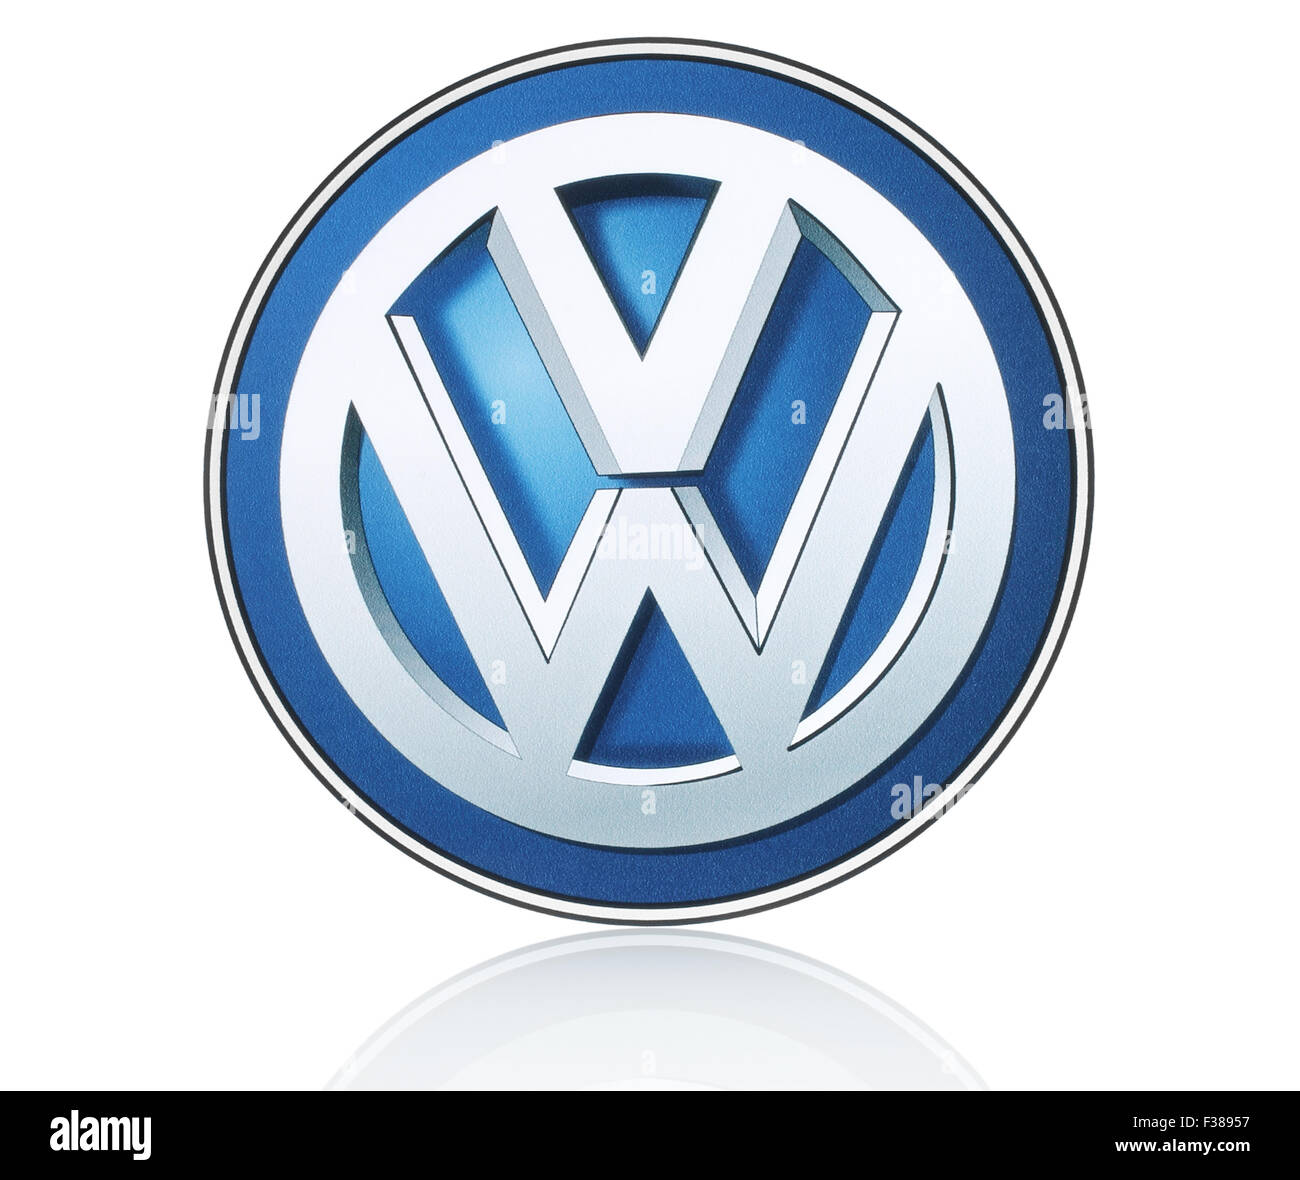 KIEV, UKRAINE - MARCH 21, 2015: Volkswagen logo printed on paper and placed on white background. Stock Photo